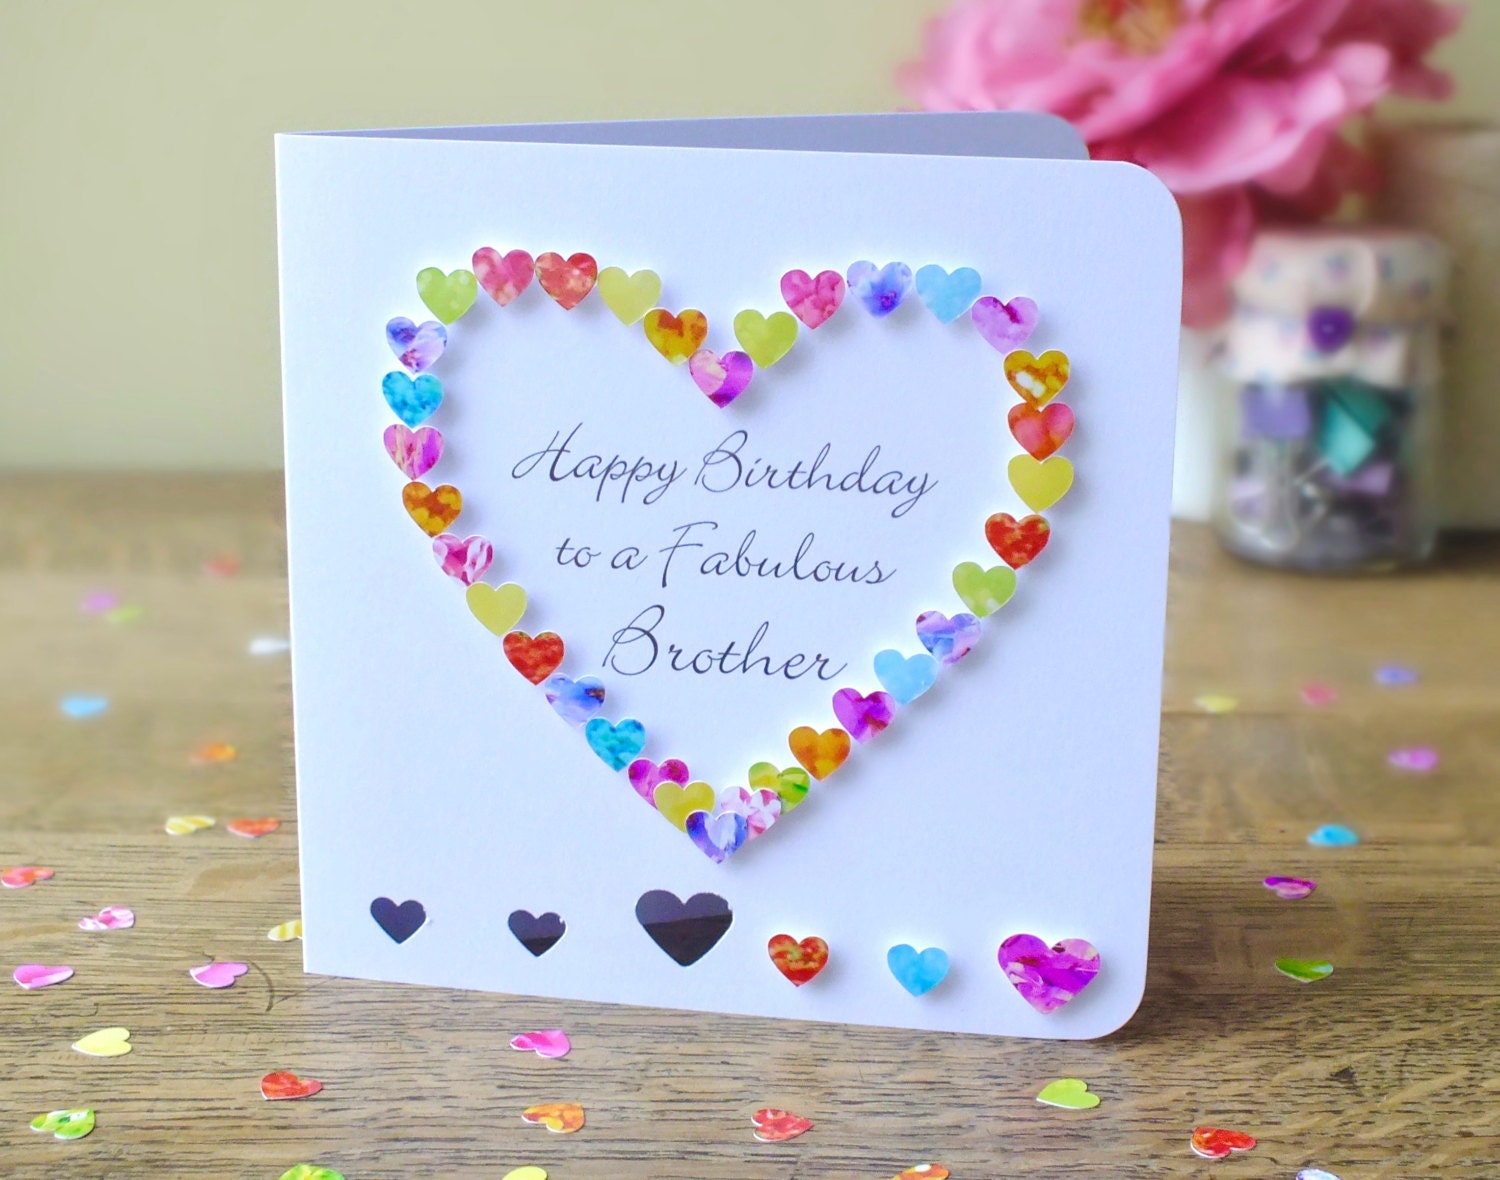 pin-by-emma-andersen-on-craft-ideas-birthday-cards-for-brother